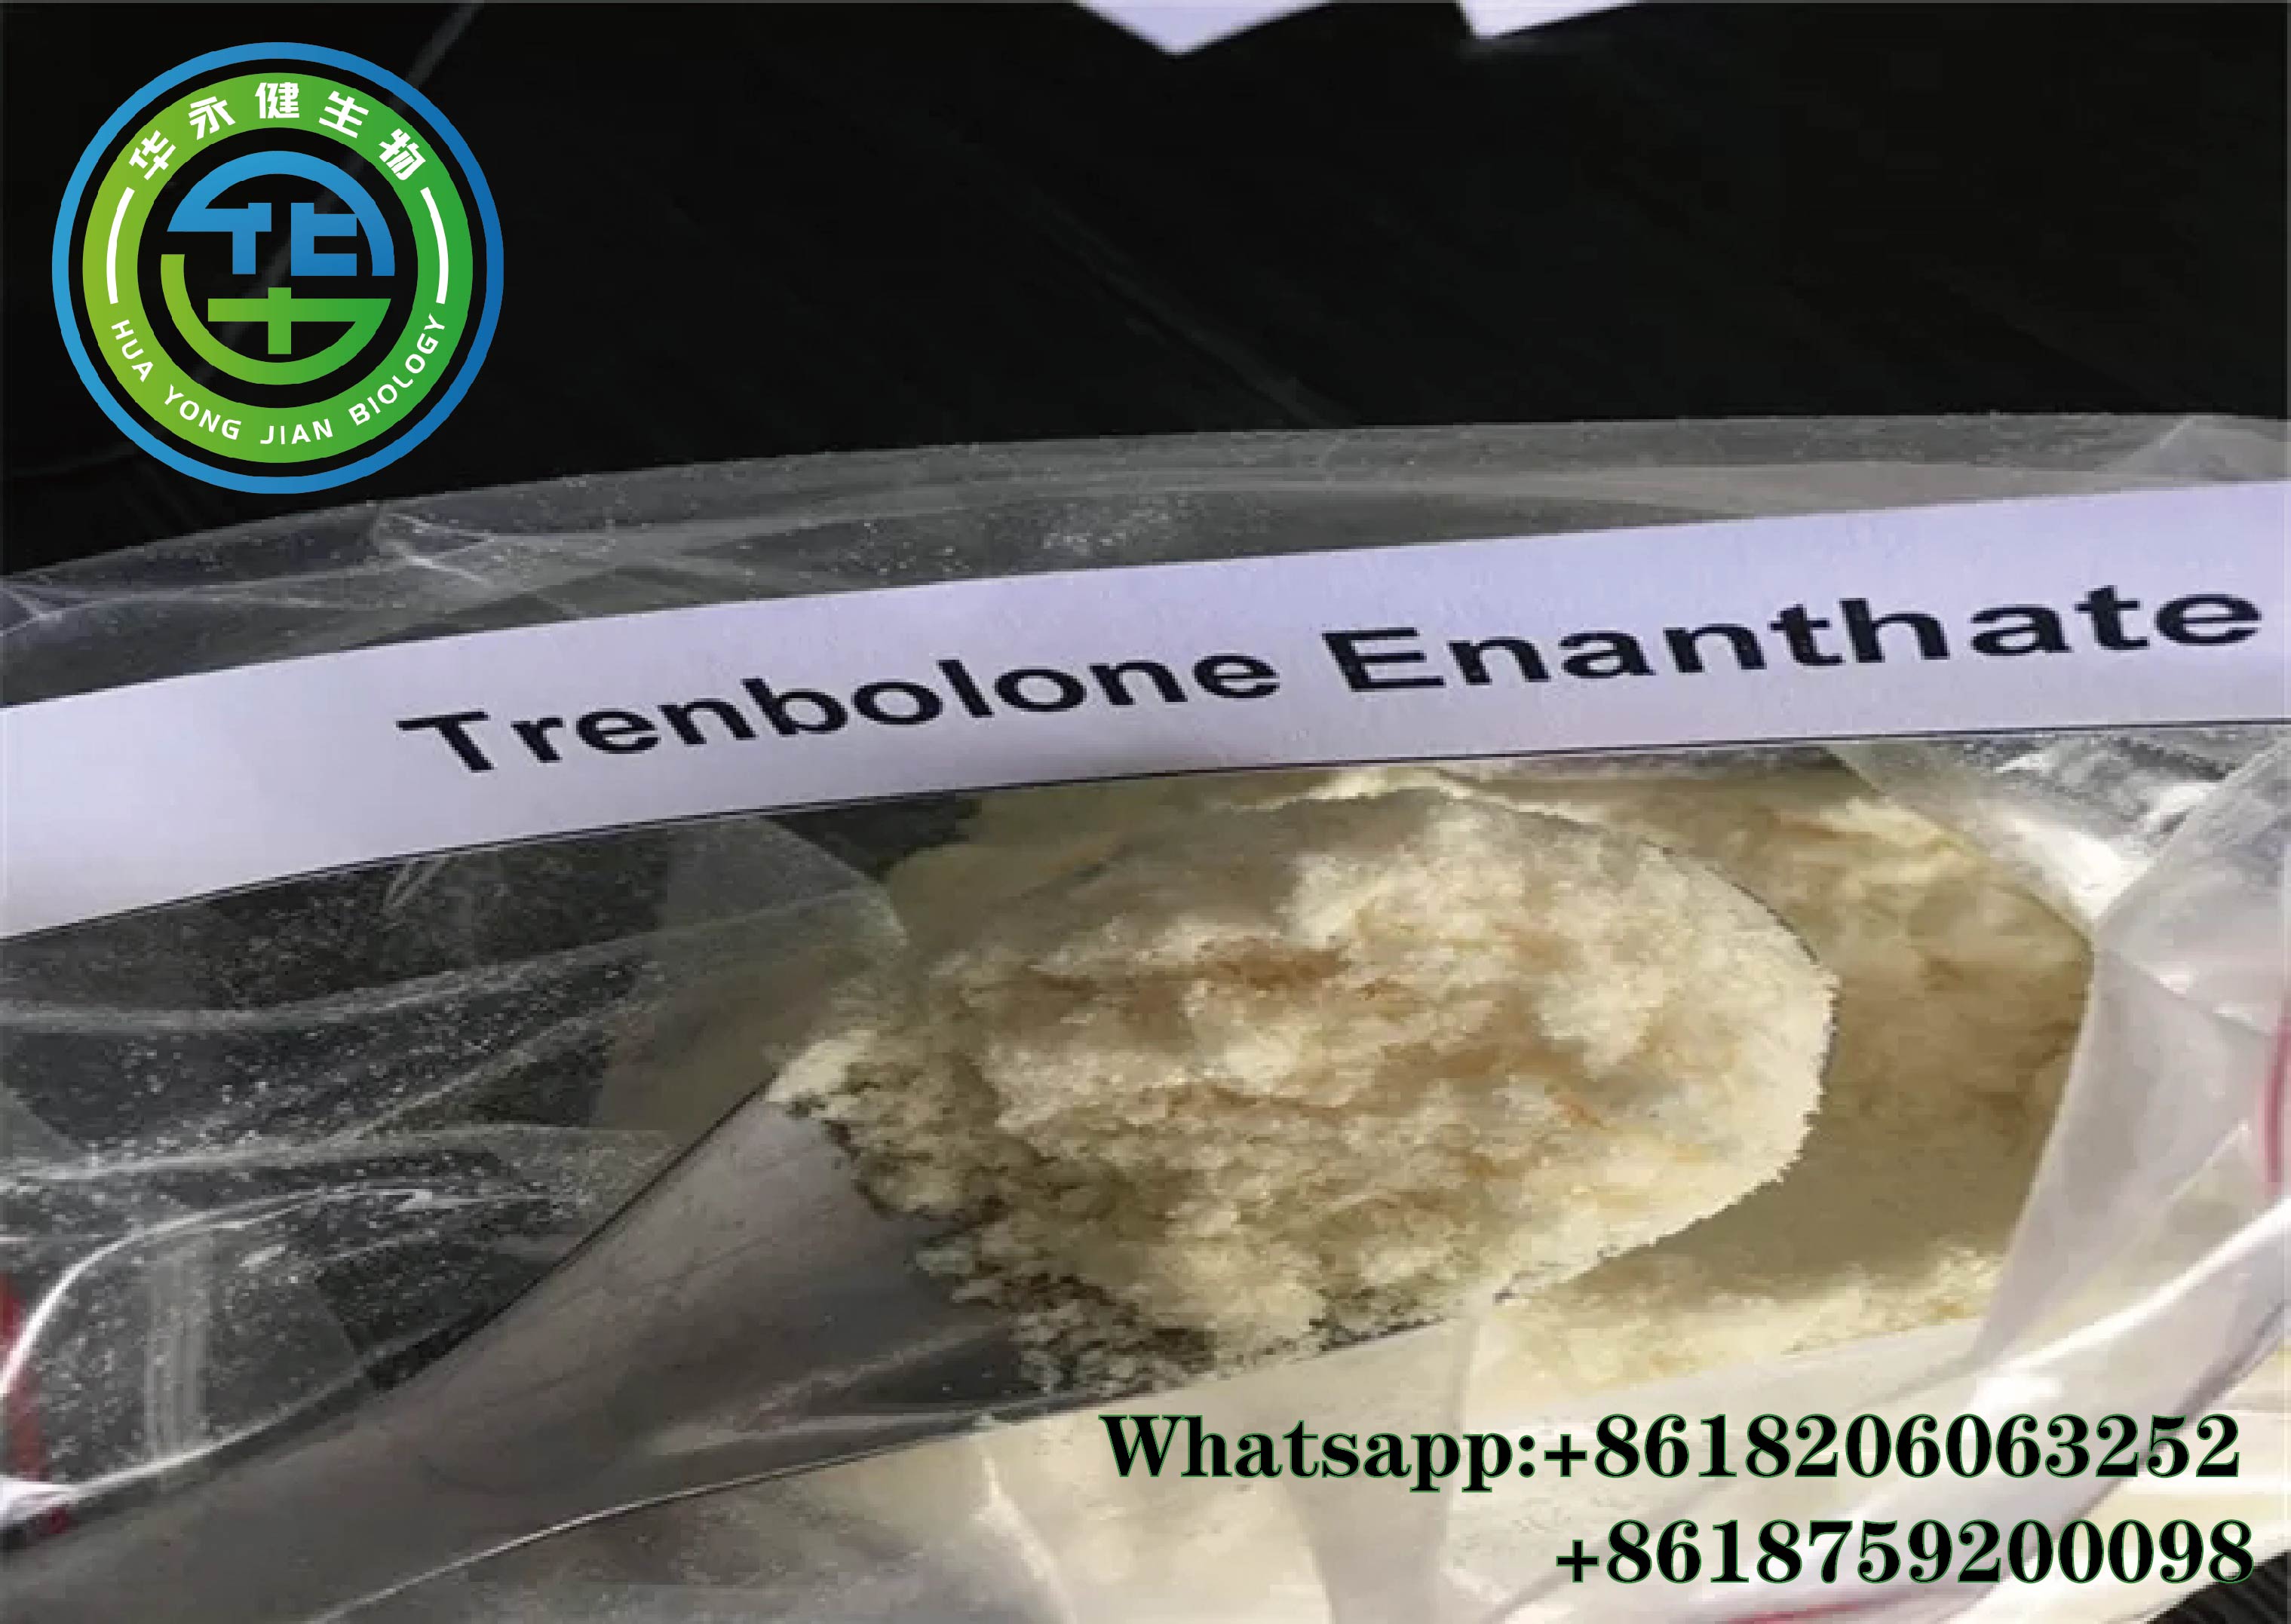 Trenbolone Enanthate23